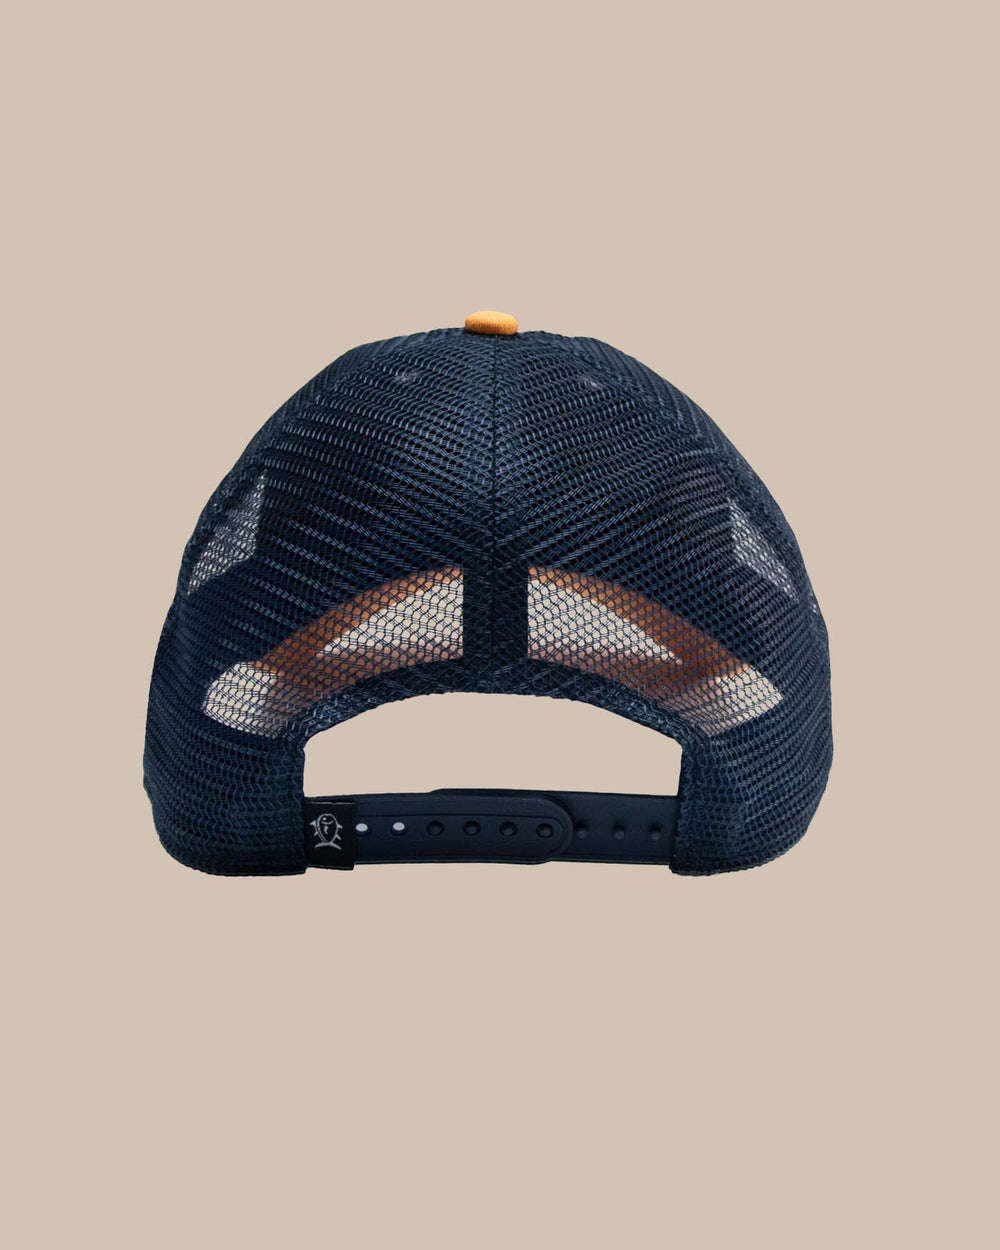 The back view of the Southern Tide The Skipjack Trucker Hat by Southern Tide - White